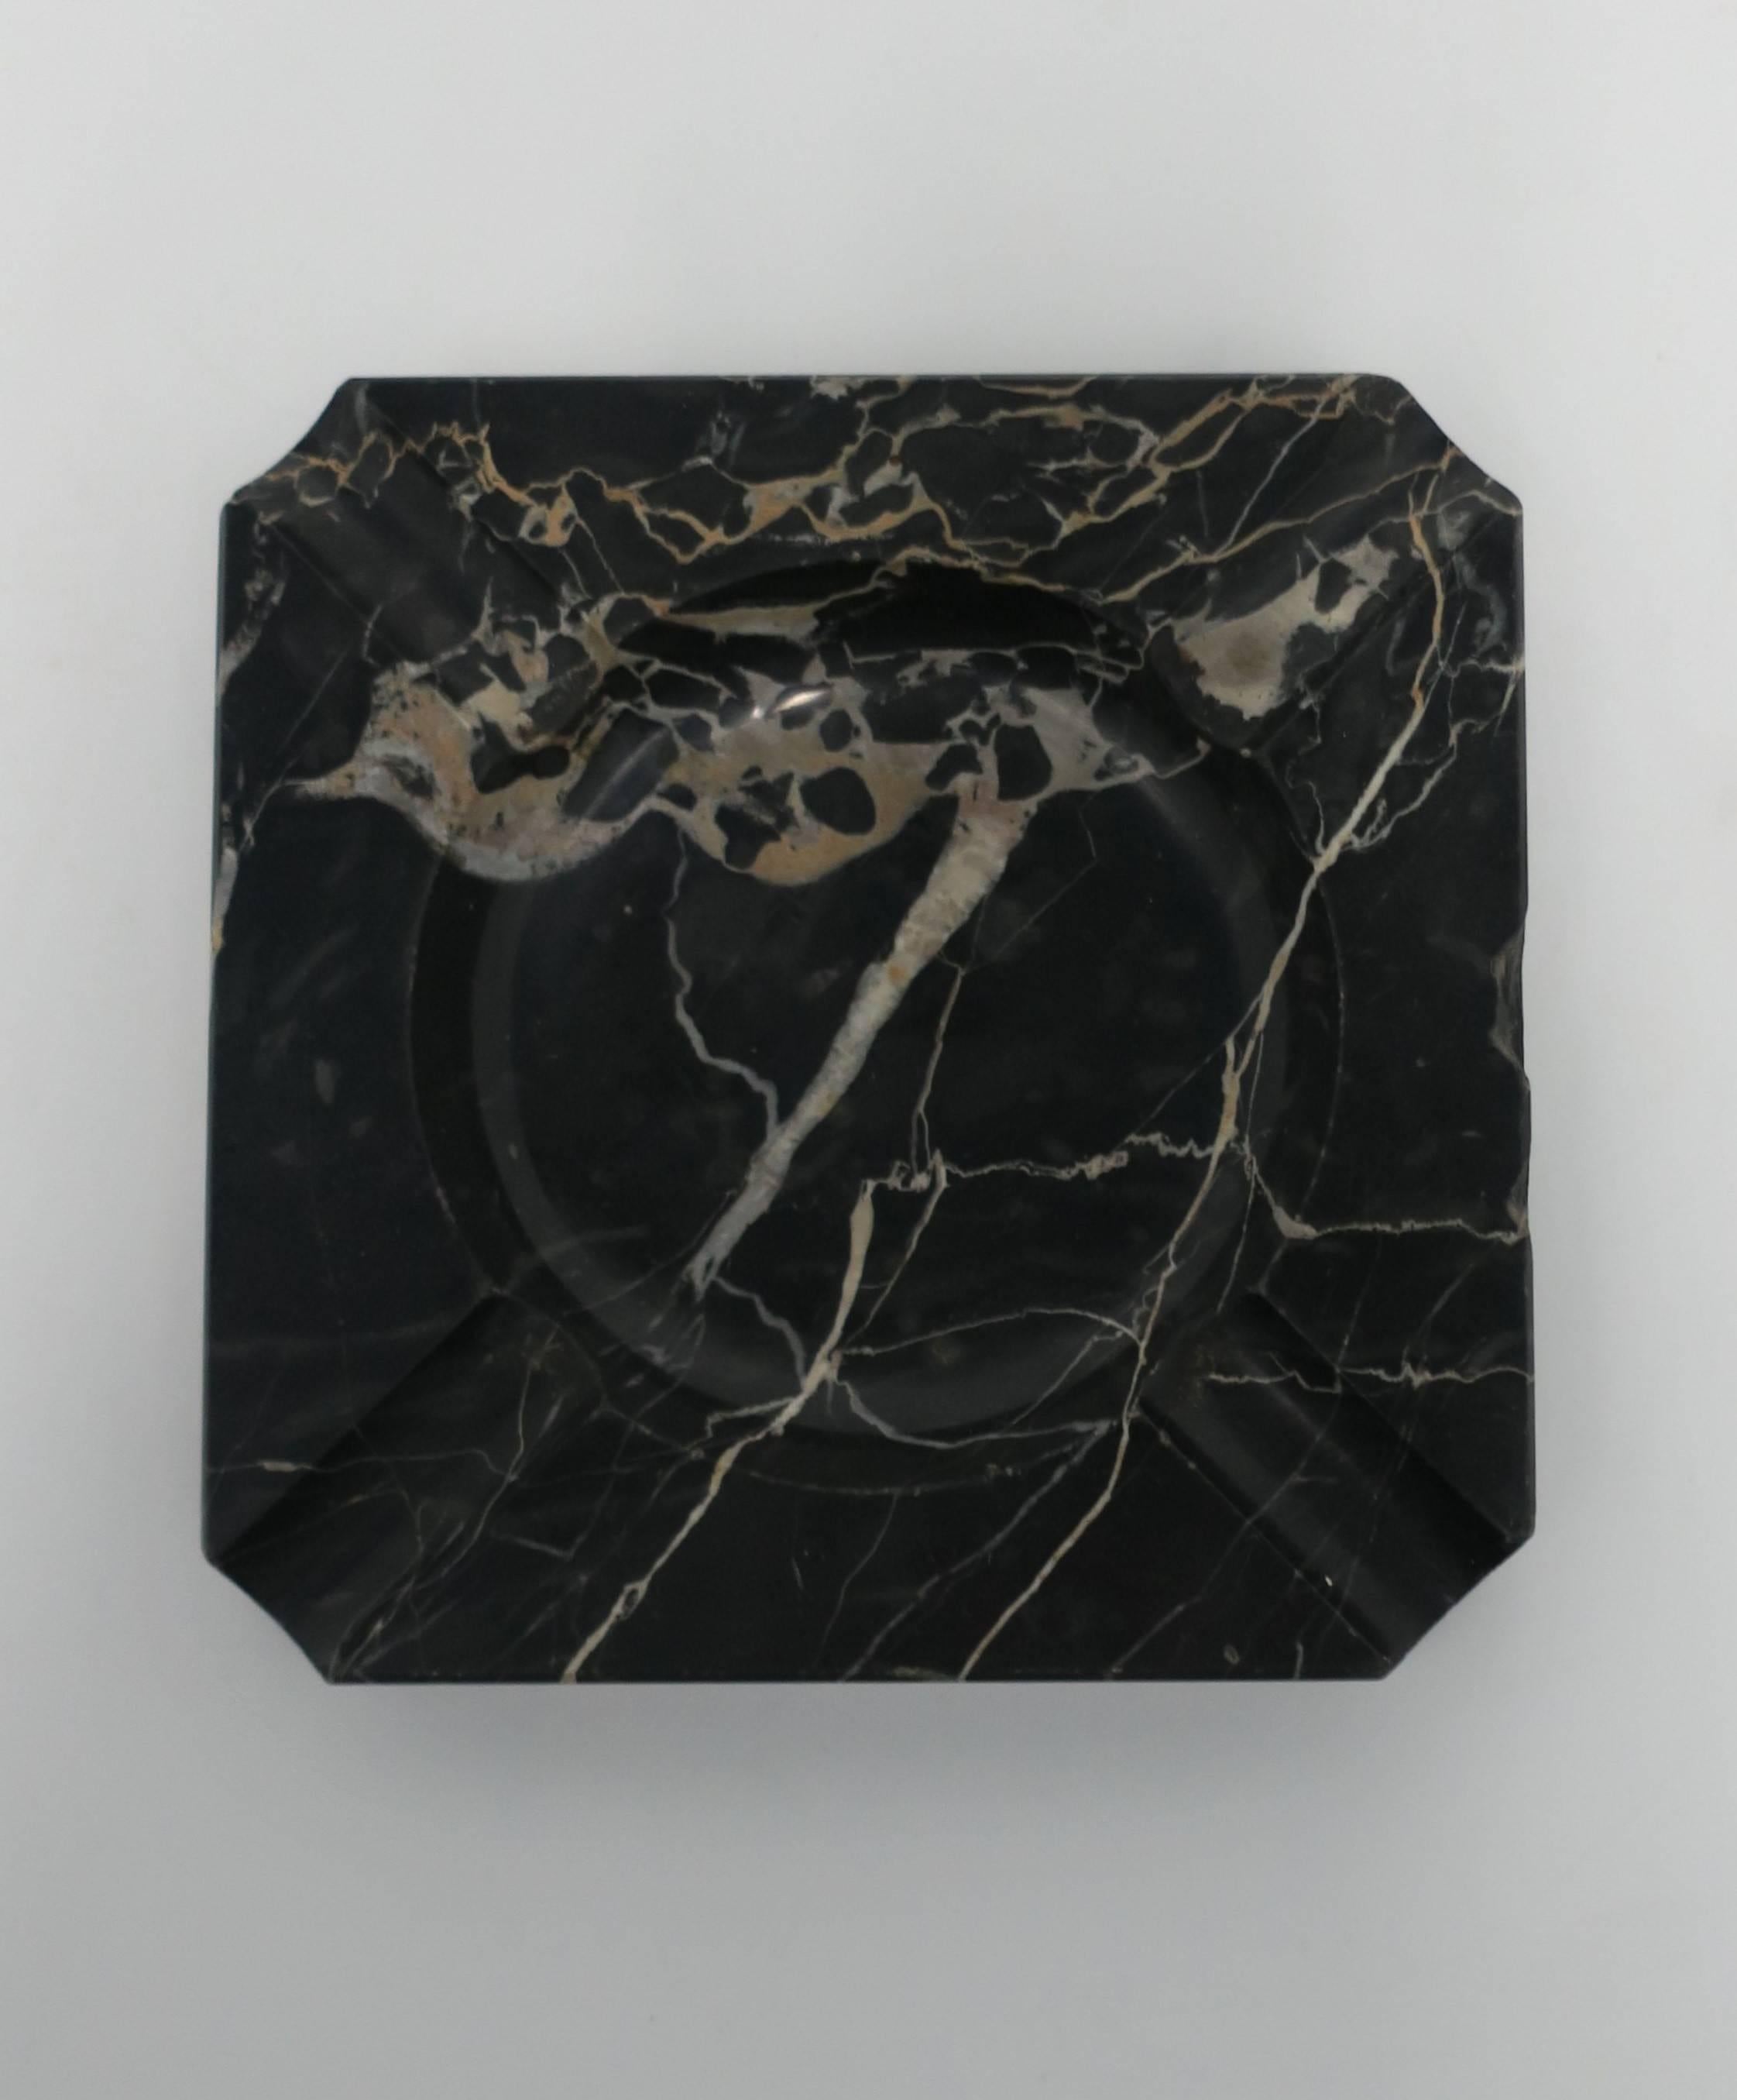 A beautiful French Art Deco black marble, with tan and white veining, ashtray or vessel. Piece does not appear to have ever been used as an ashtray. As show in images, piece can hold small items such as jewelry, or as a desk accessory, paperweight,